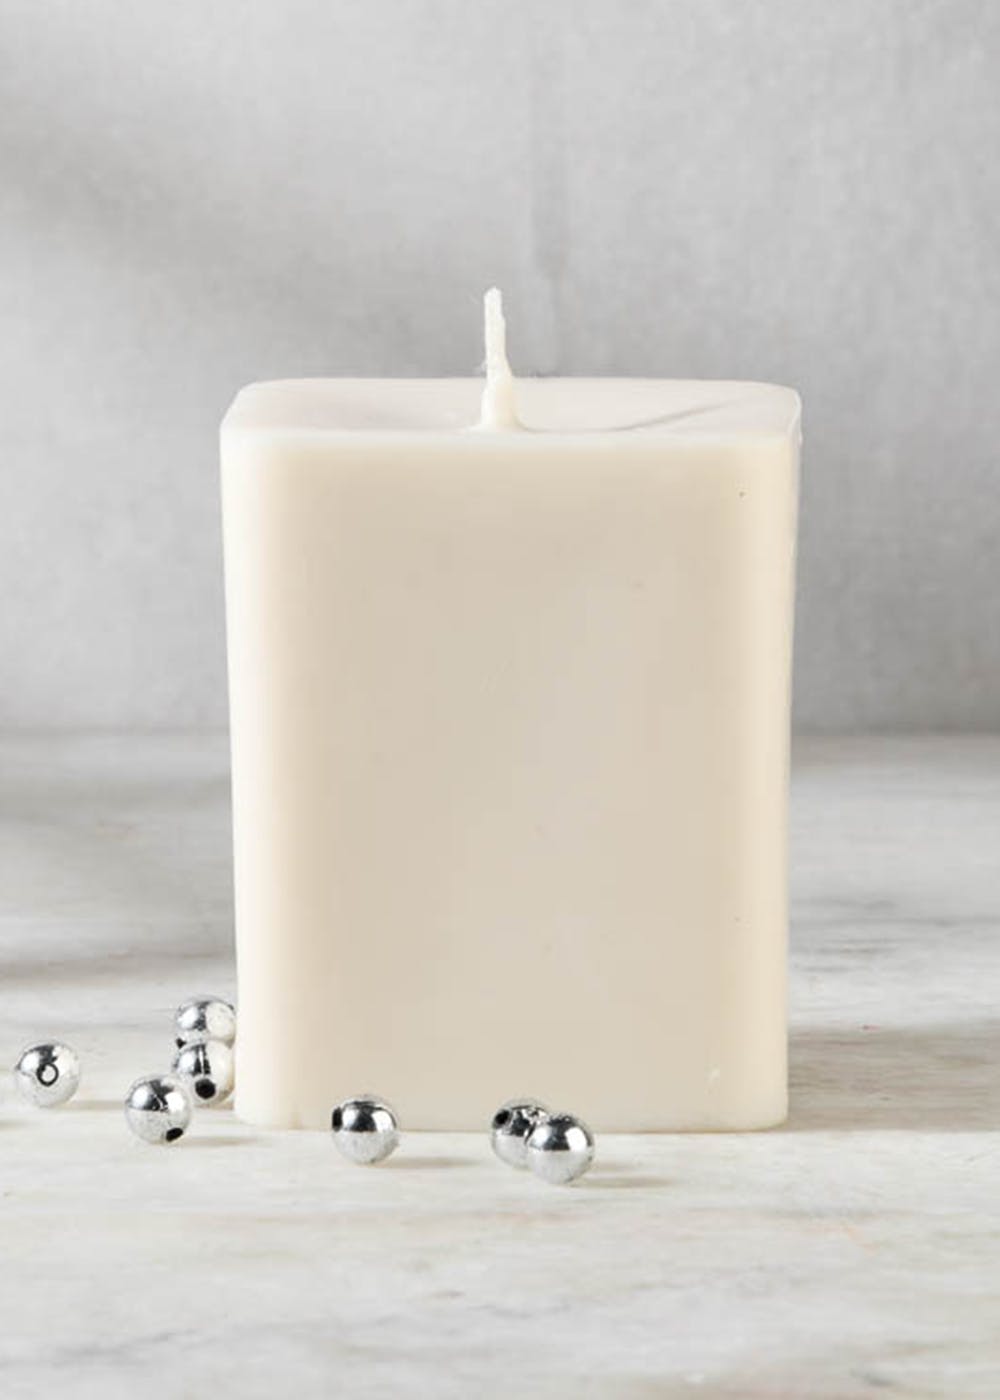 Kindness - Cinnamon Roll Scented Candle